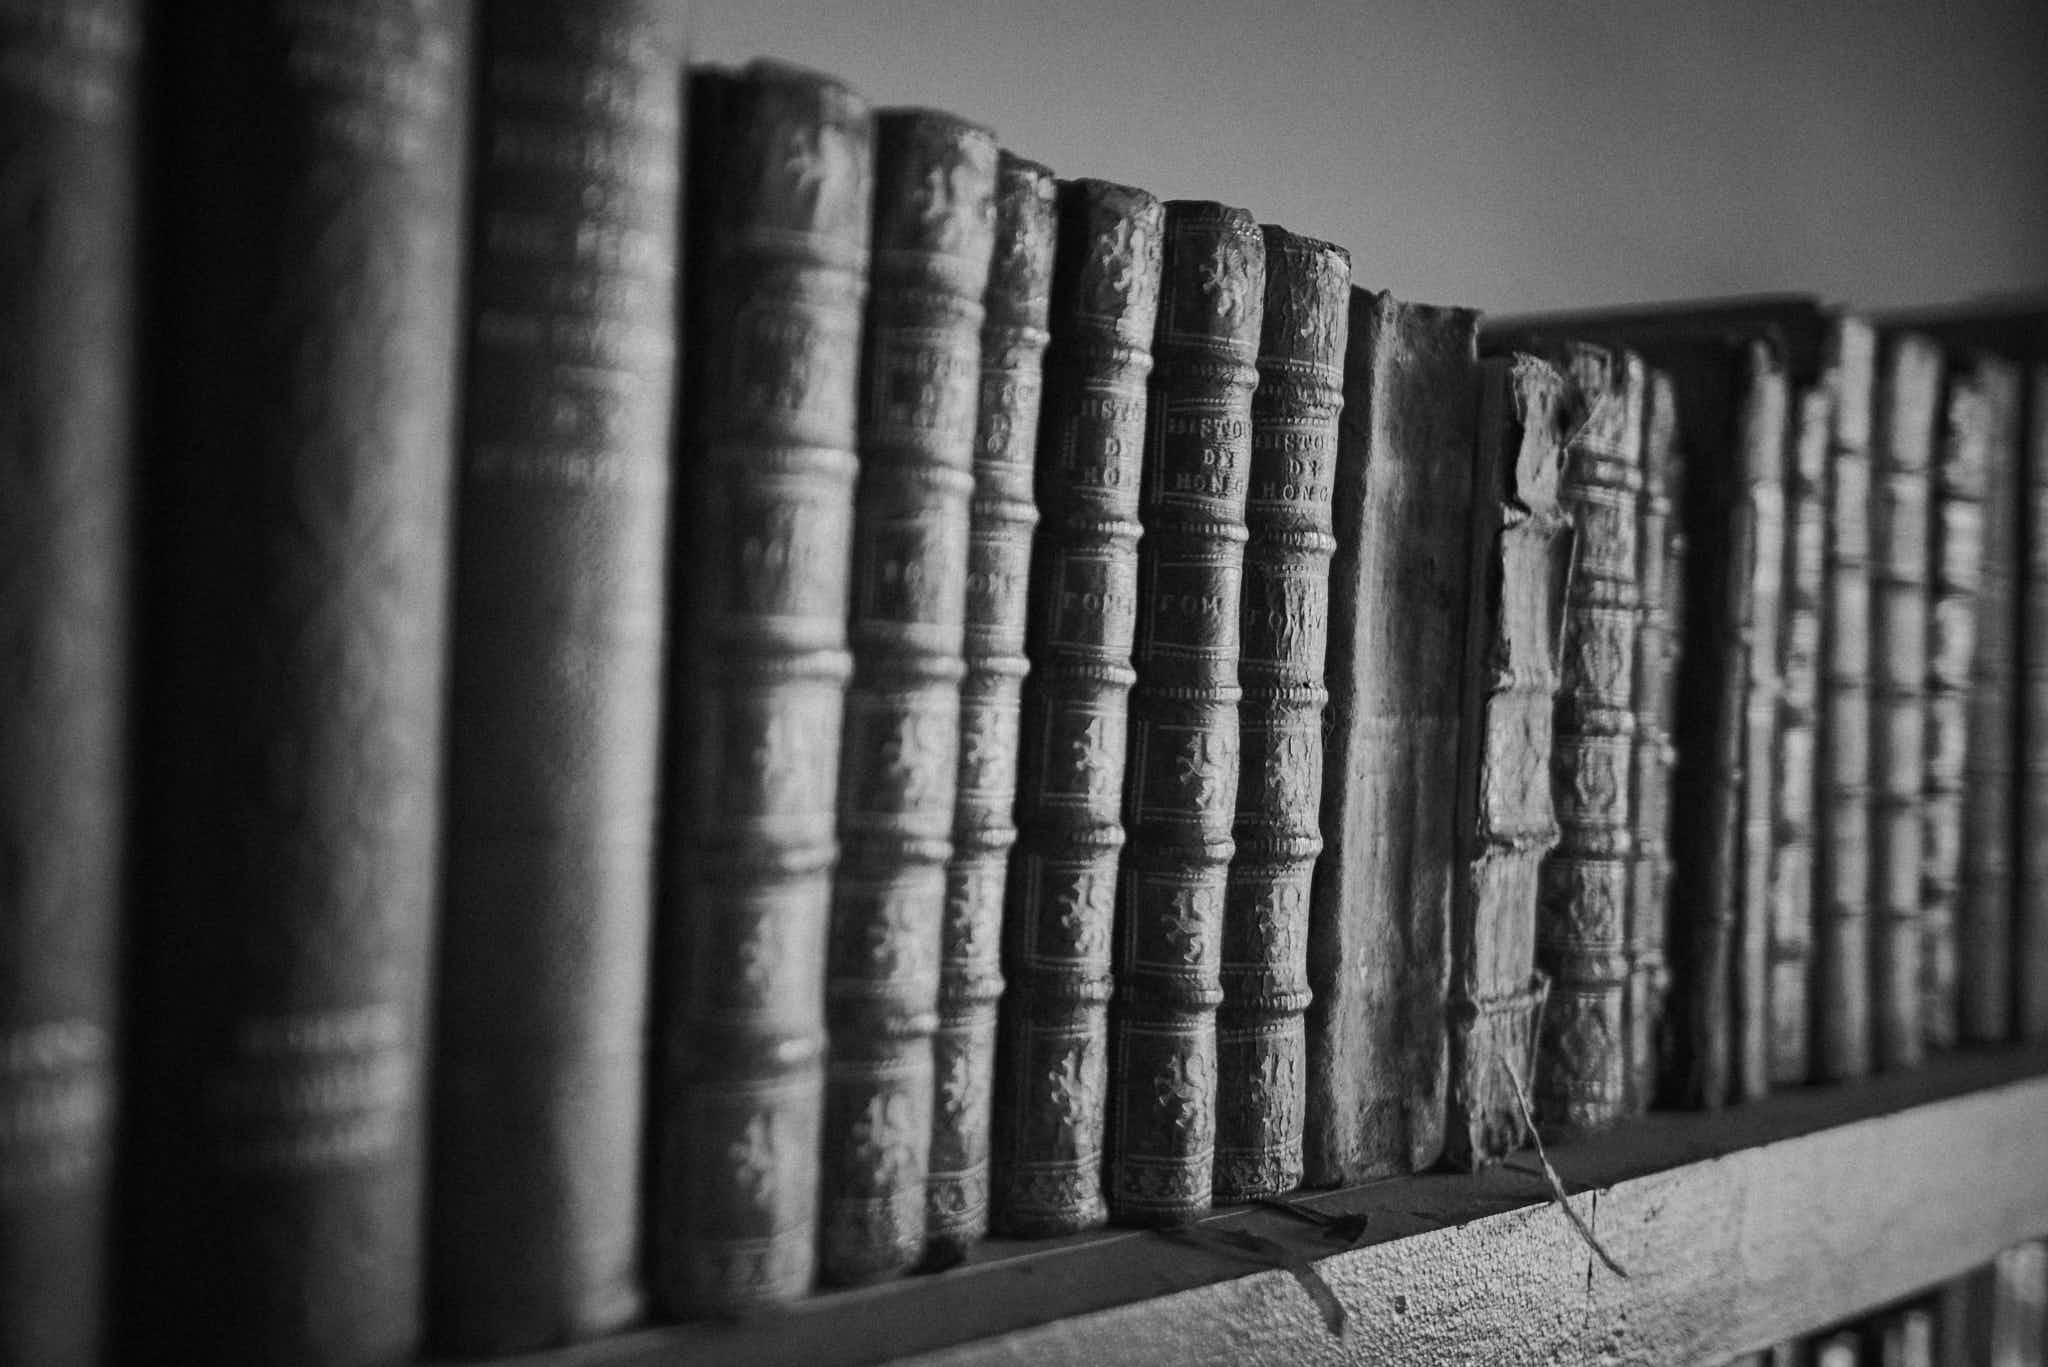 Still life #240331.4. A black and white photograph of old books on a shelf.